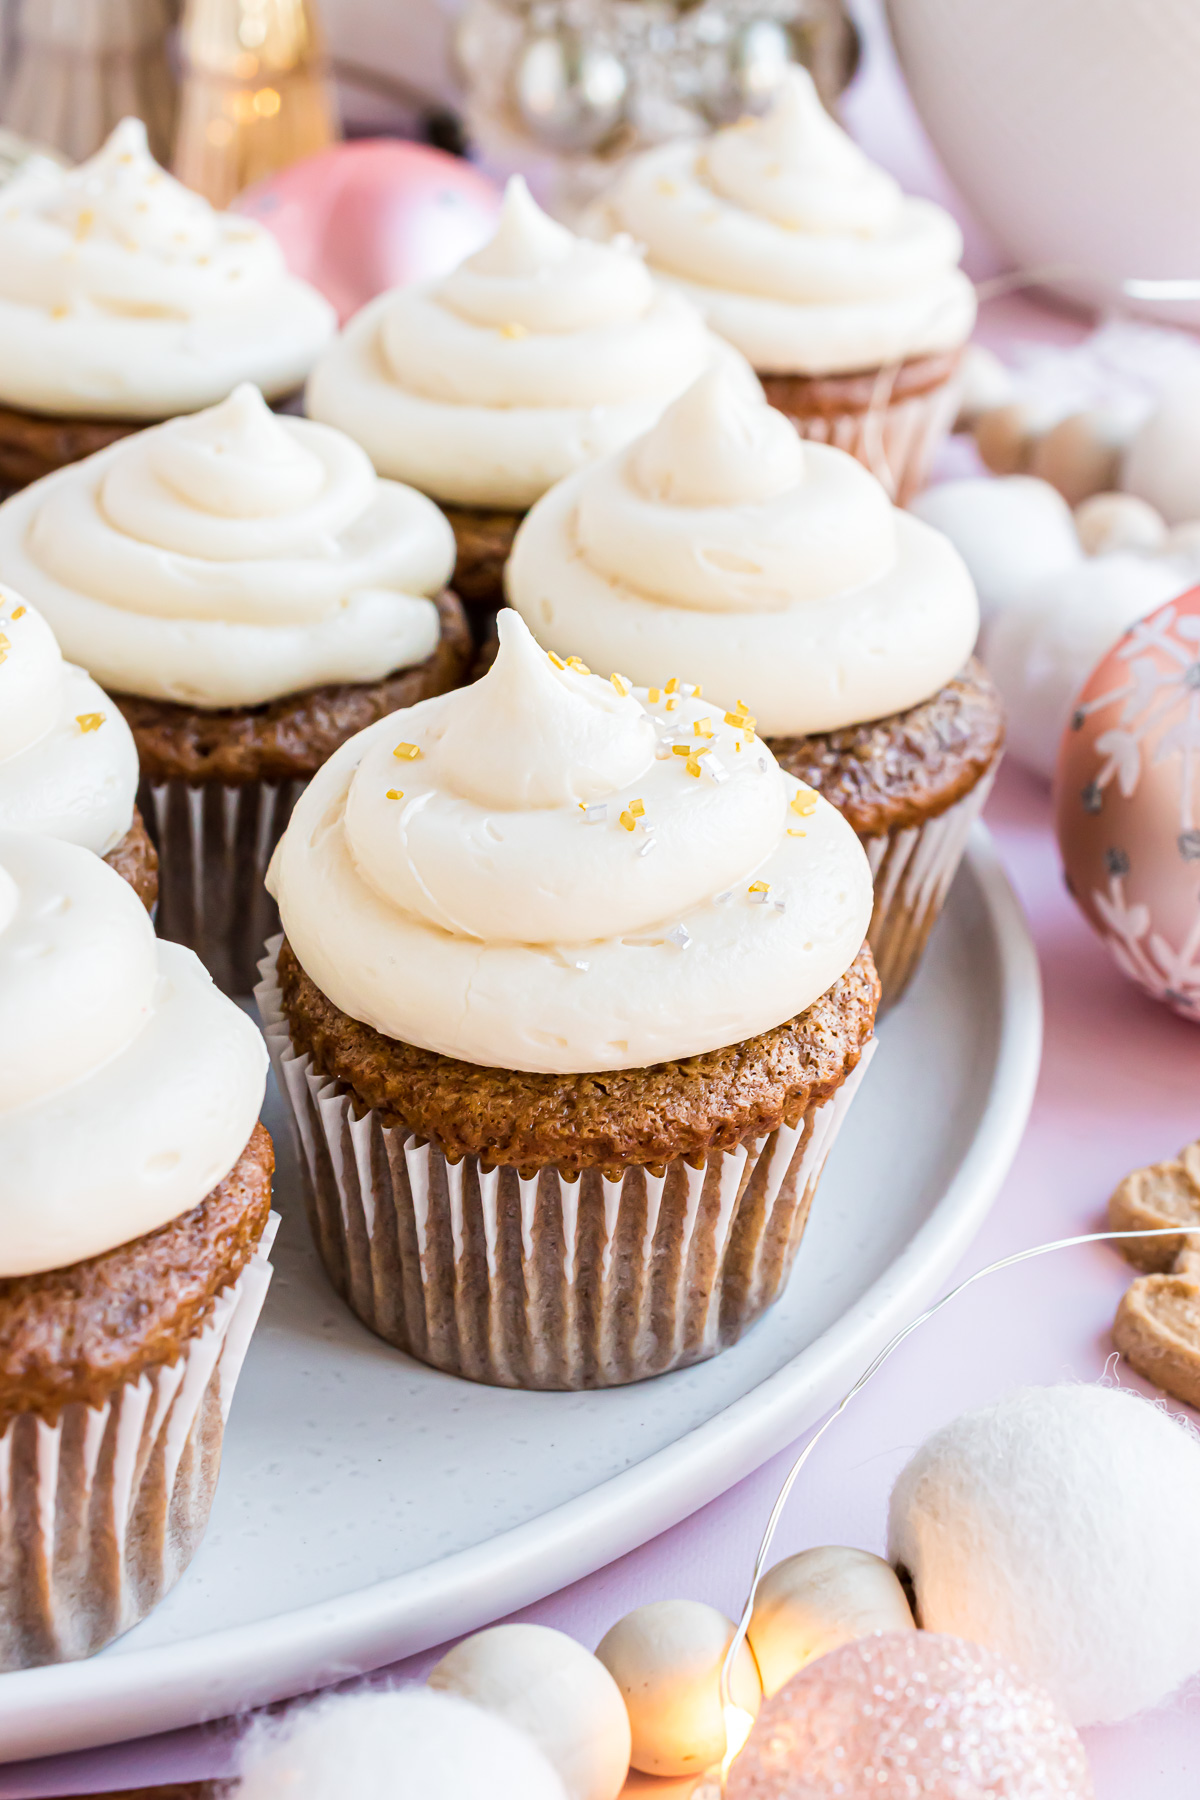 A gingerbread cupcake on a white serving platter topped with a swirl of cream cheese frosting, adorned with gold and silver sprinkles and surrounded by other cupcakes.